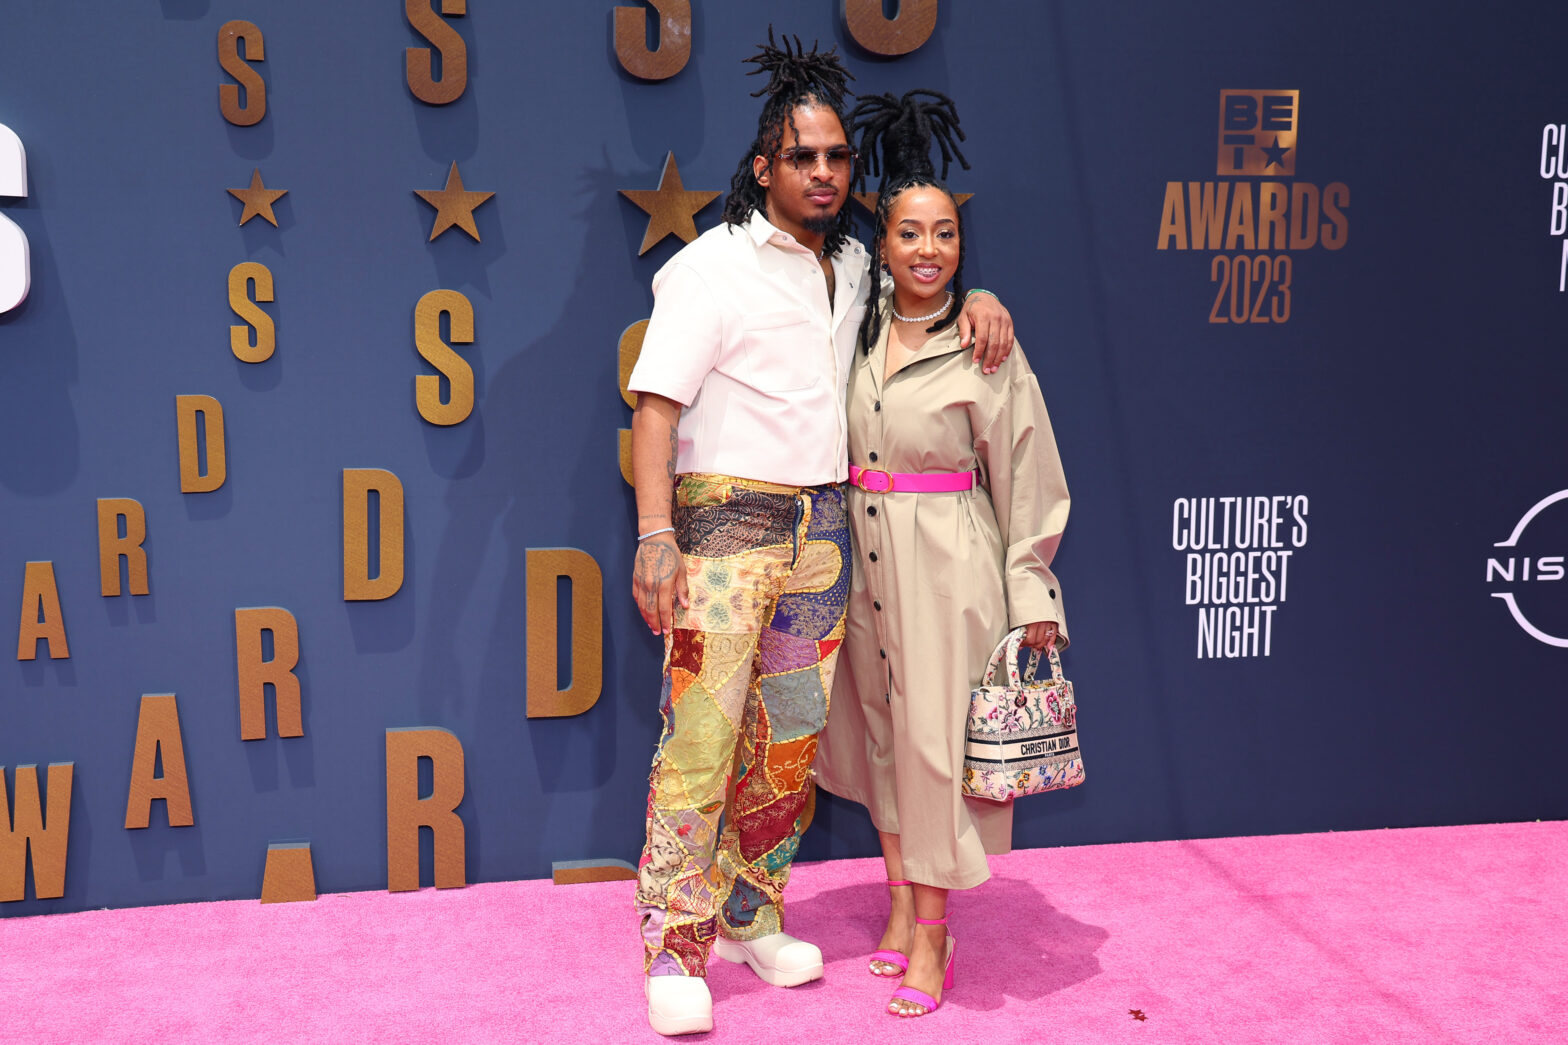 Keith Lee Gushes Over Wife In Review Of Their First BET Awards